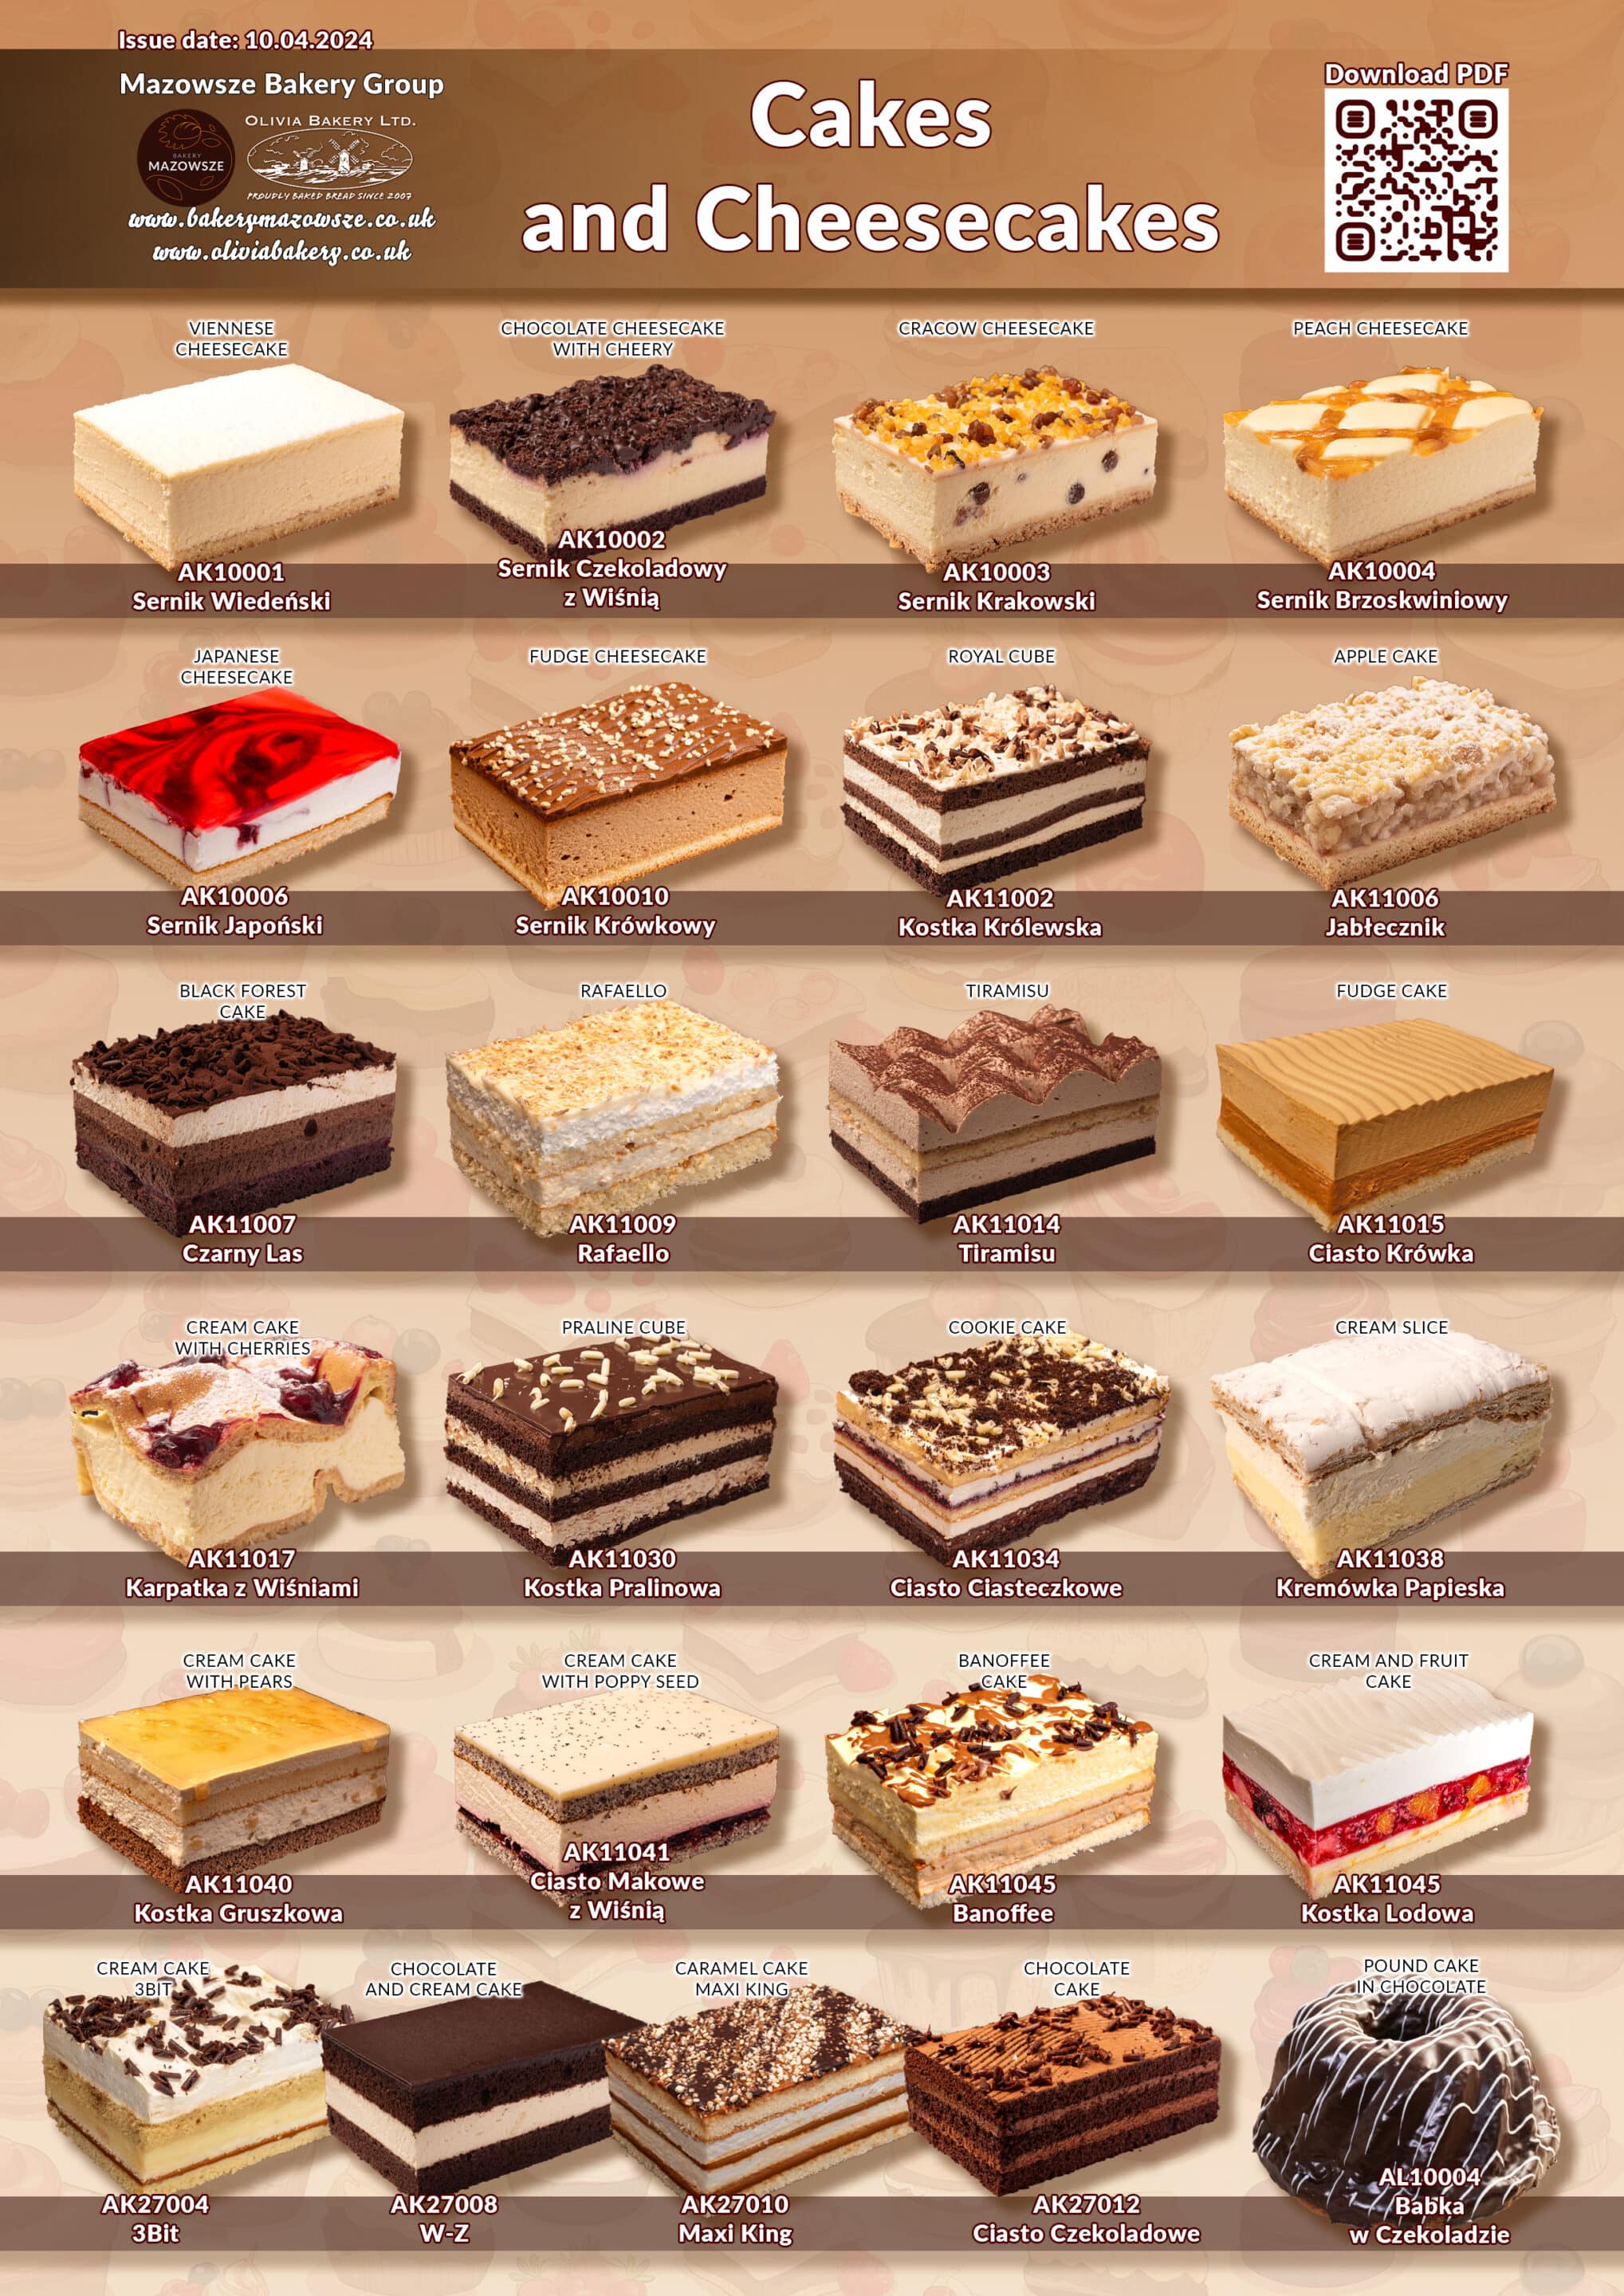 Variety of cakes and cheesecakes from Mazowsze Bakery Group, featuring classic flavors and unique combinations.